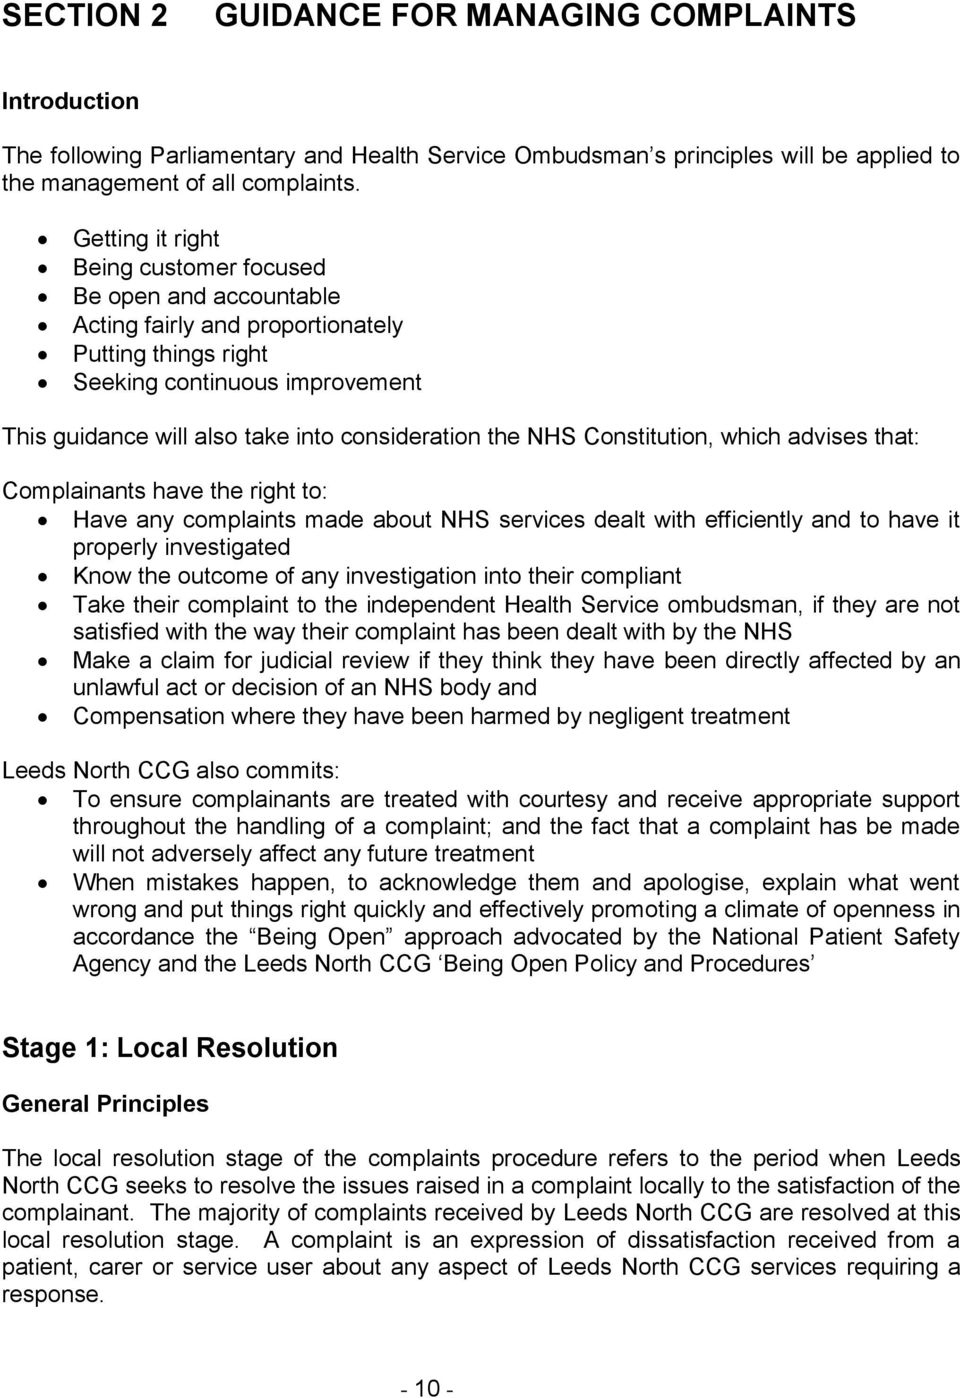 the NHS Constitution, which advises that: Complainants have the right to: Have any complaints made about NHS services dealt with efficiently and to have it properly investigated Know the outcome of